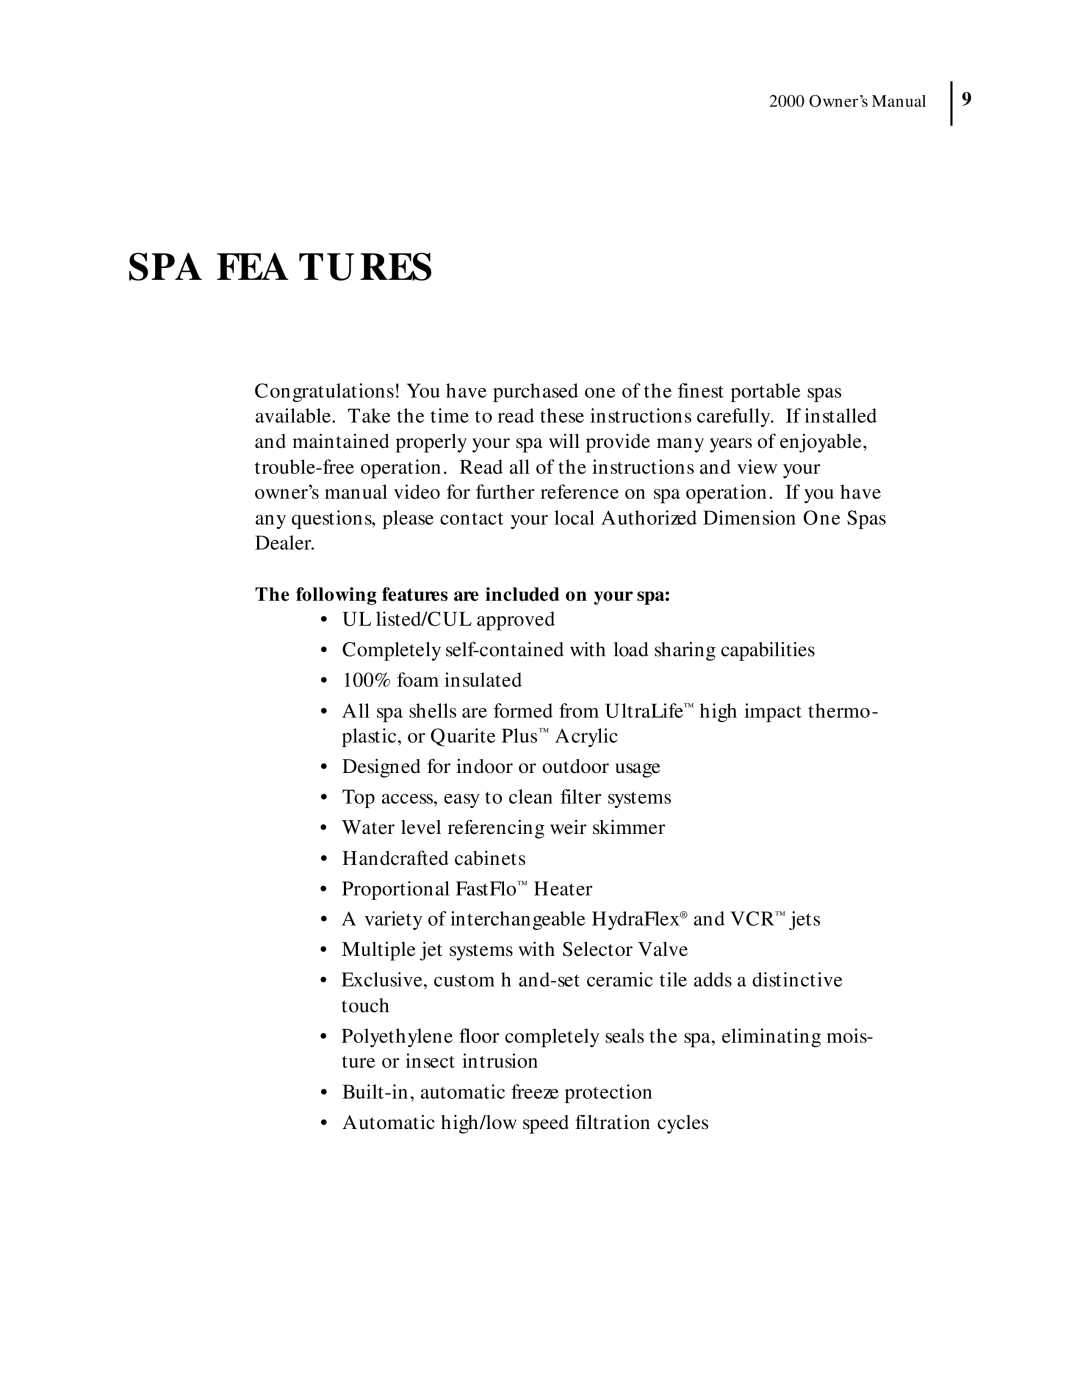 Dimension One Spas 2000 Model manual Spa Features, The following features are included on your spa 